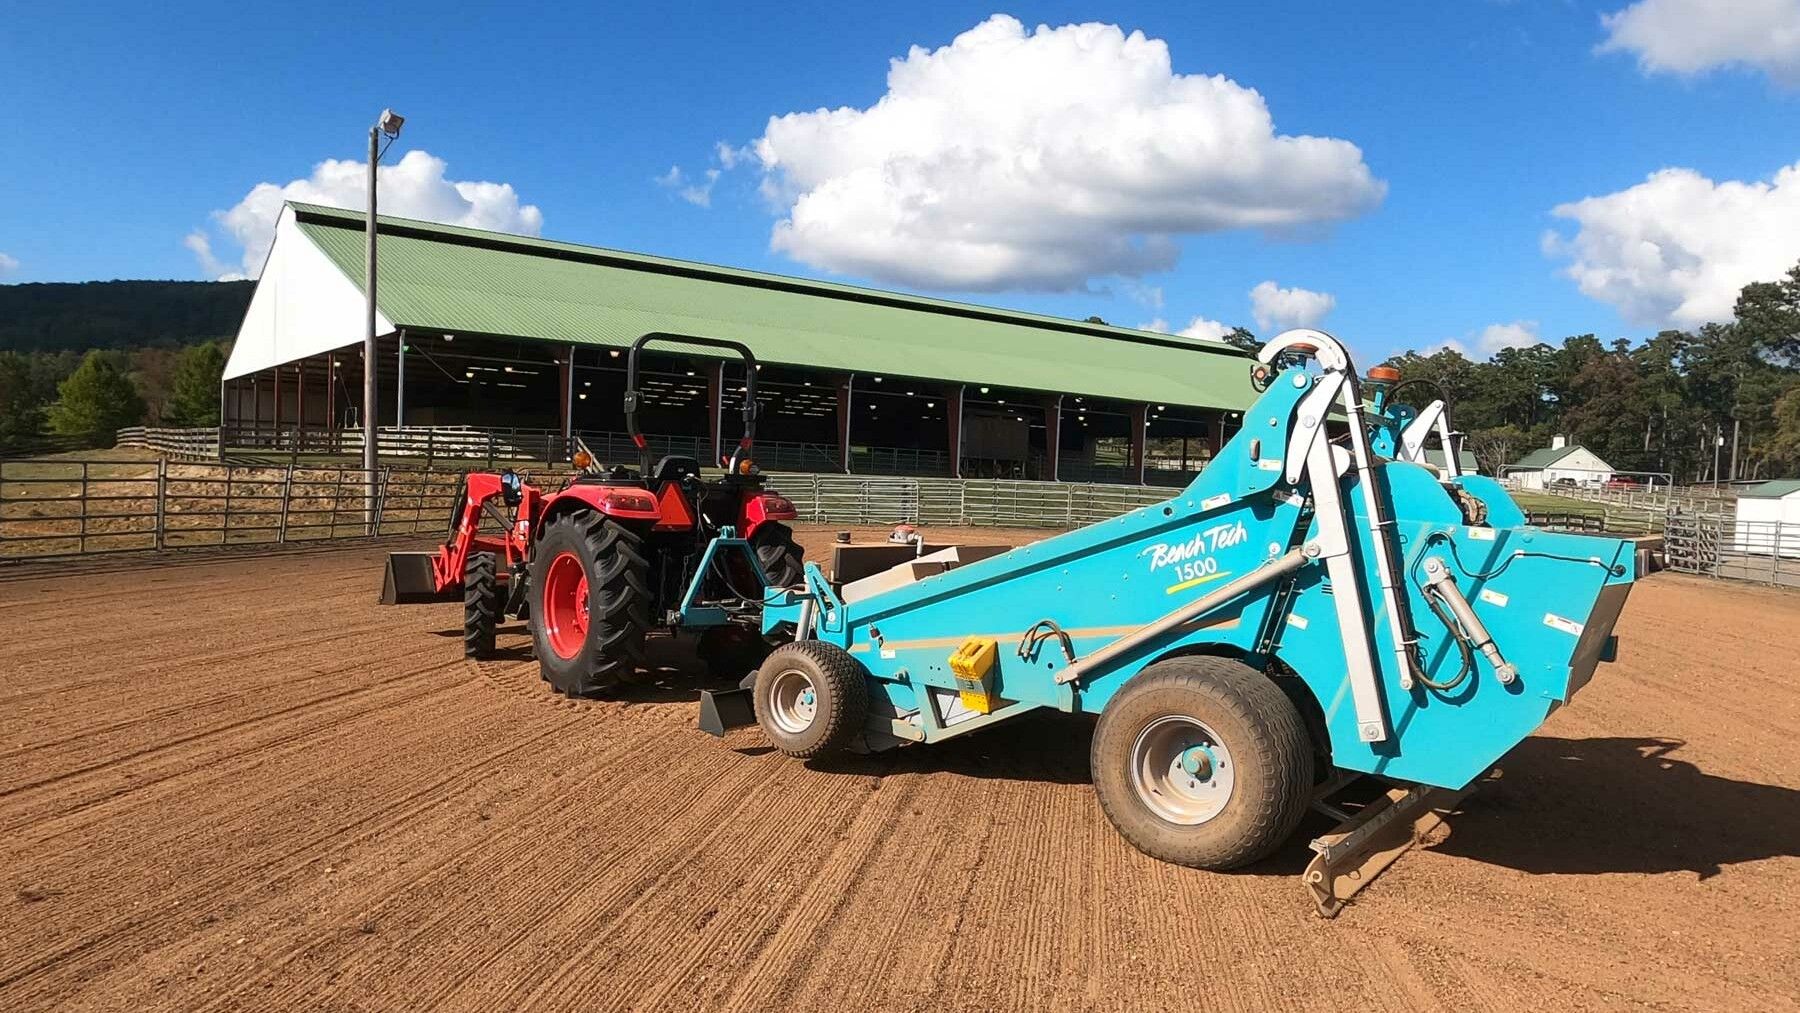 BeachTech 1500 in use at the riding facility